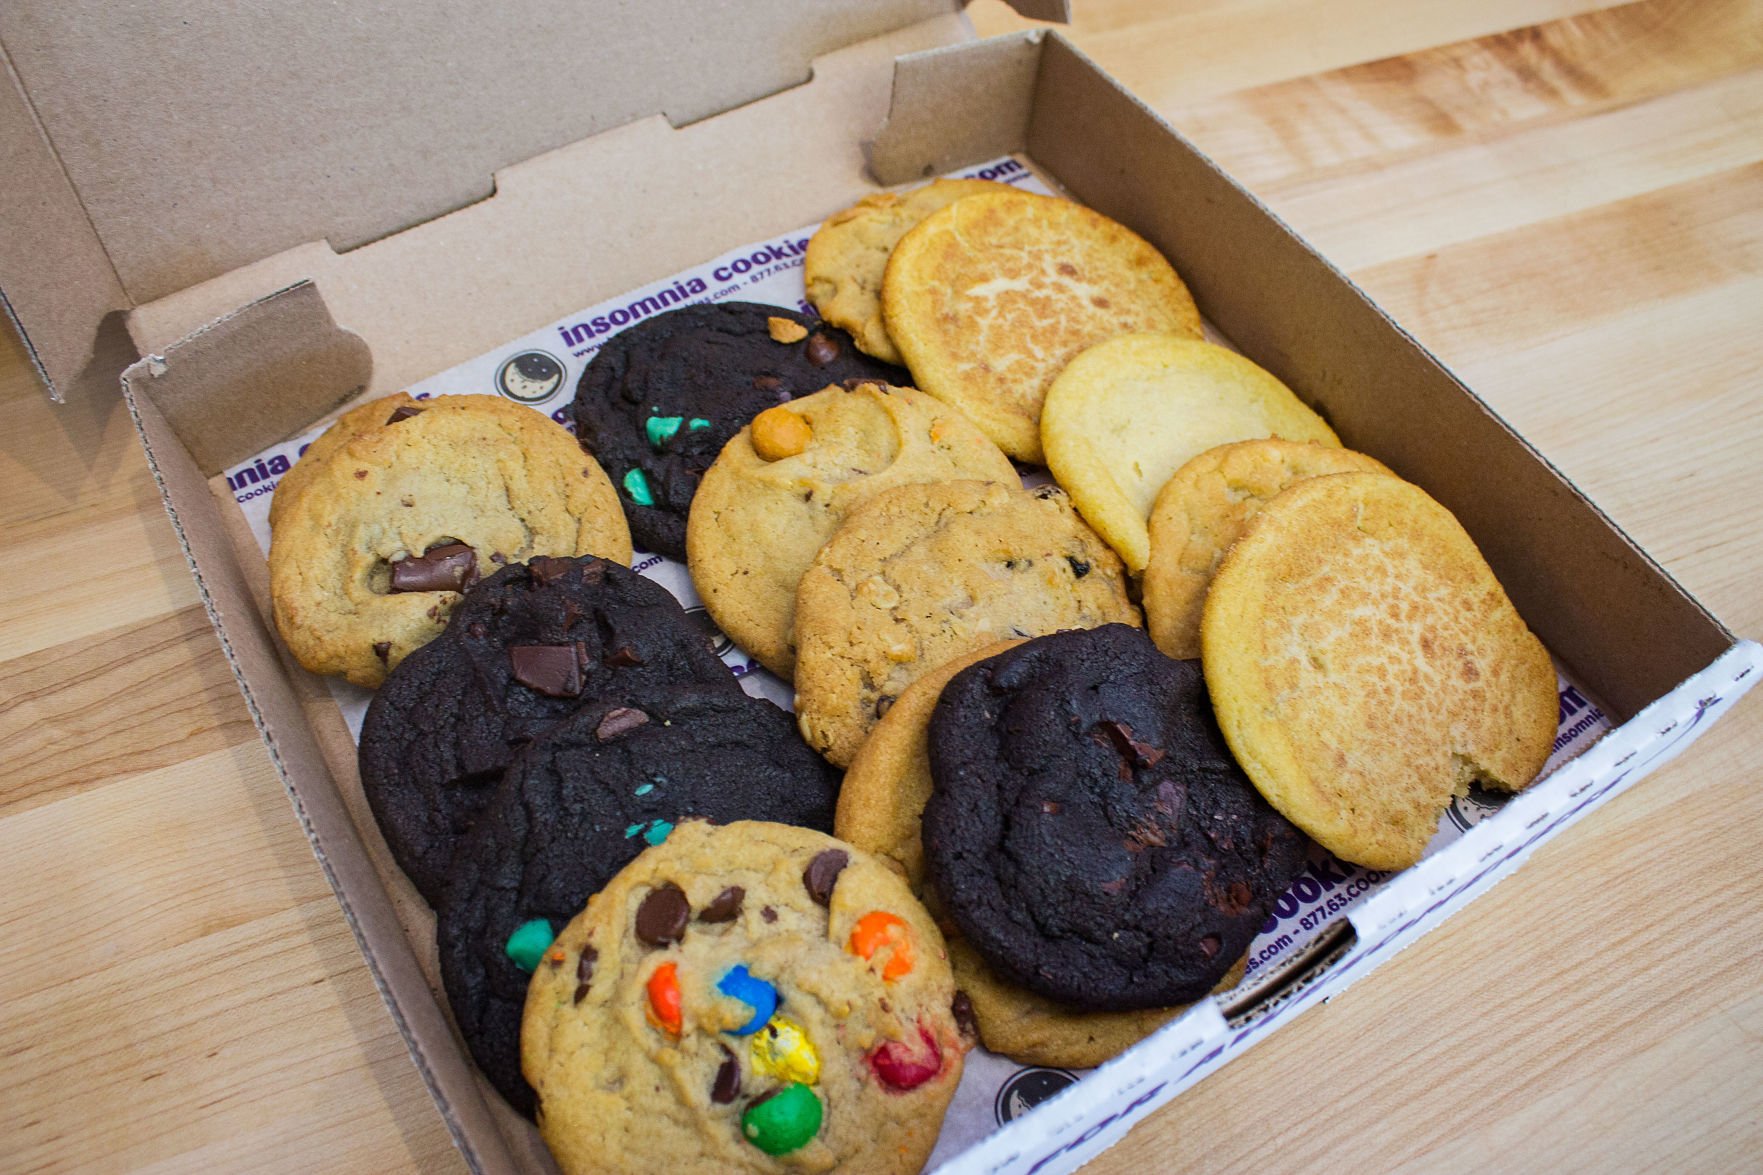 coupon code insomnia cookies delivery